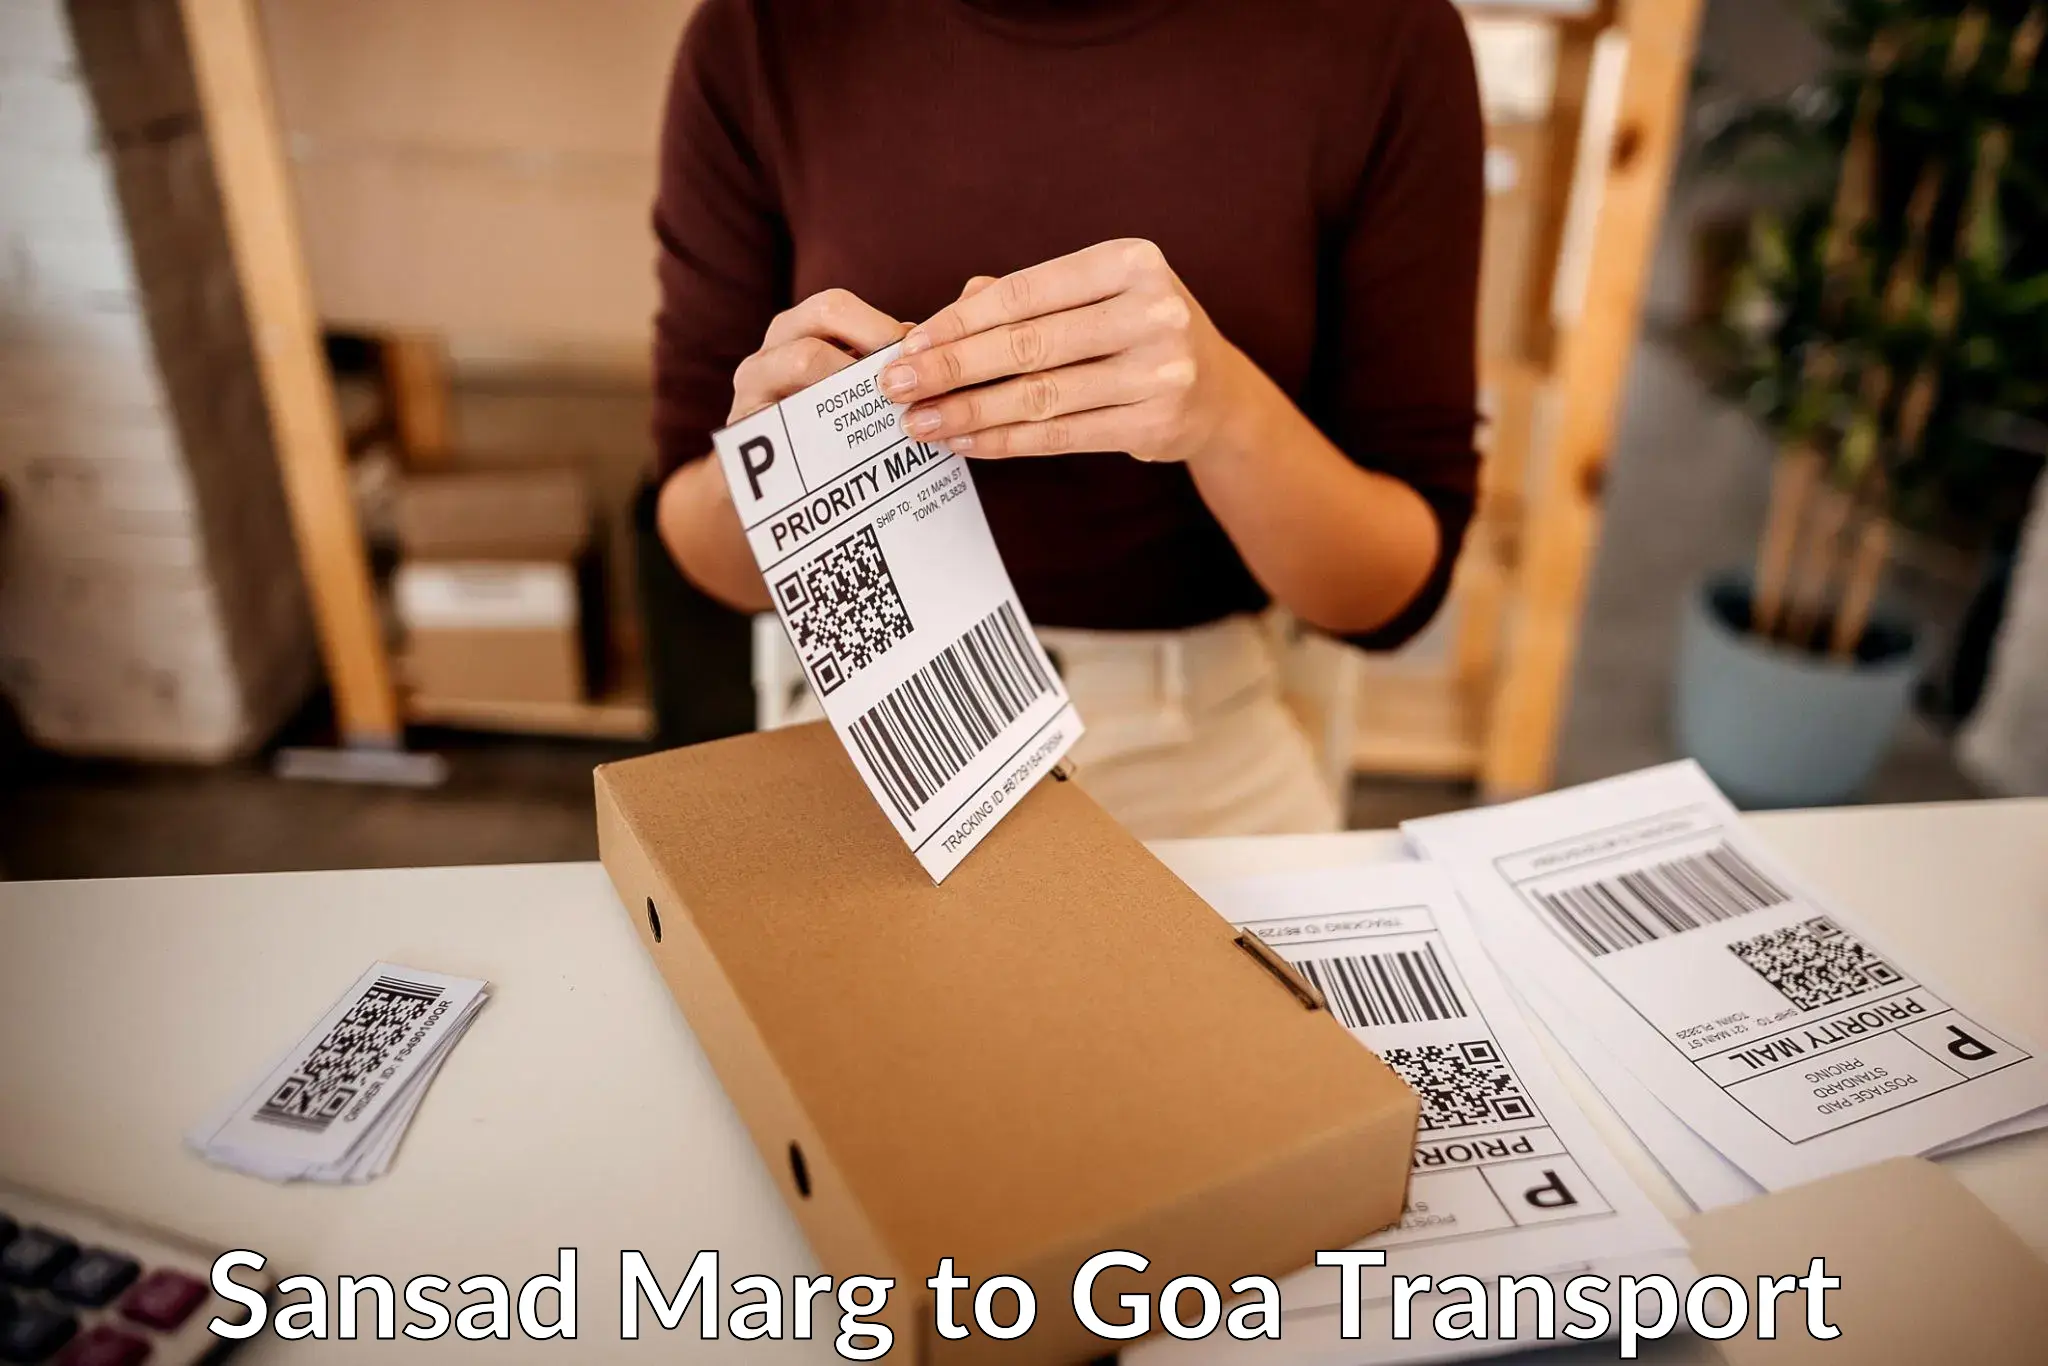 Transport bike from one state to another Sansad Marg to Goa